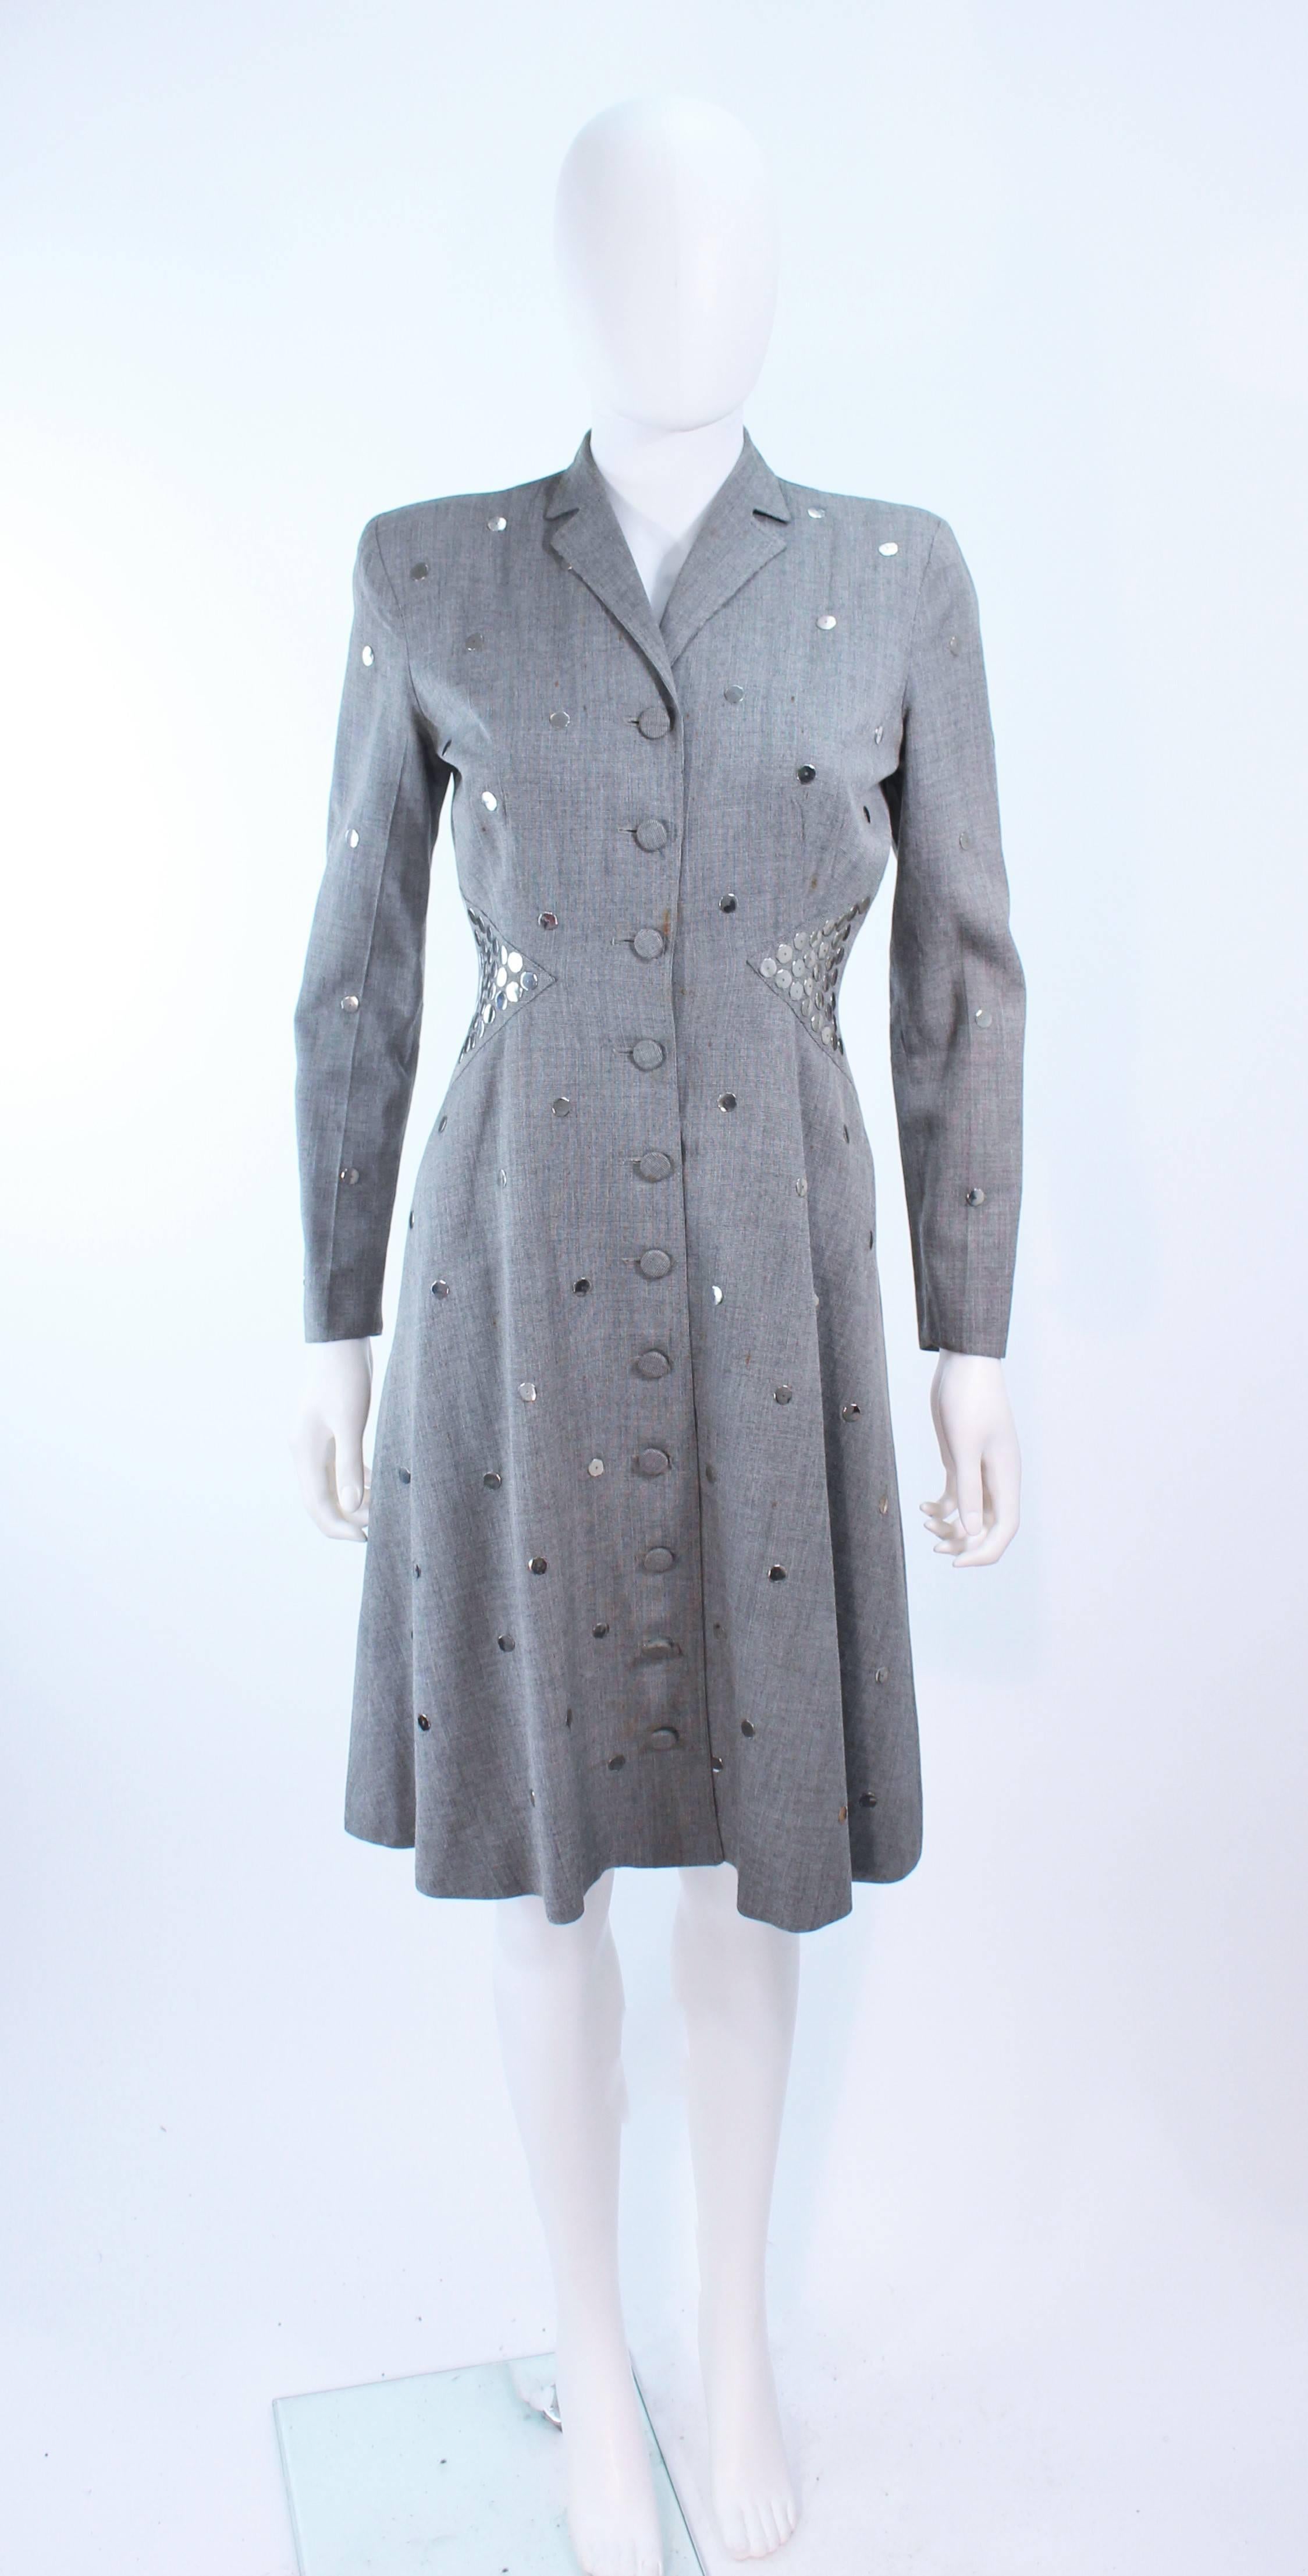 This Kay Collier design is composed of a grey printed wool with metal sequin applique. There are center front button closures. In vintage condition sold 